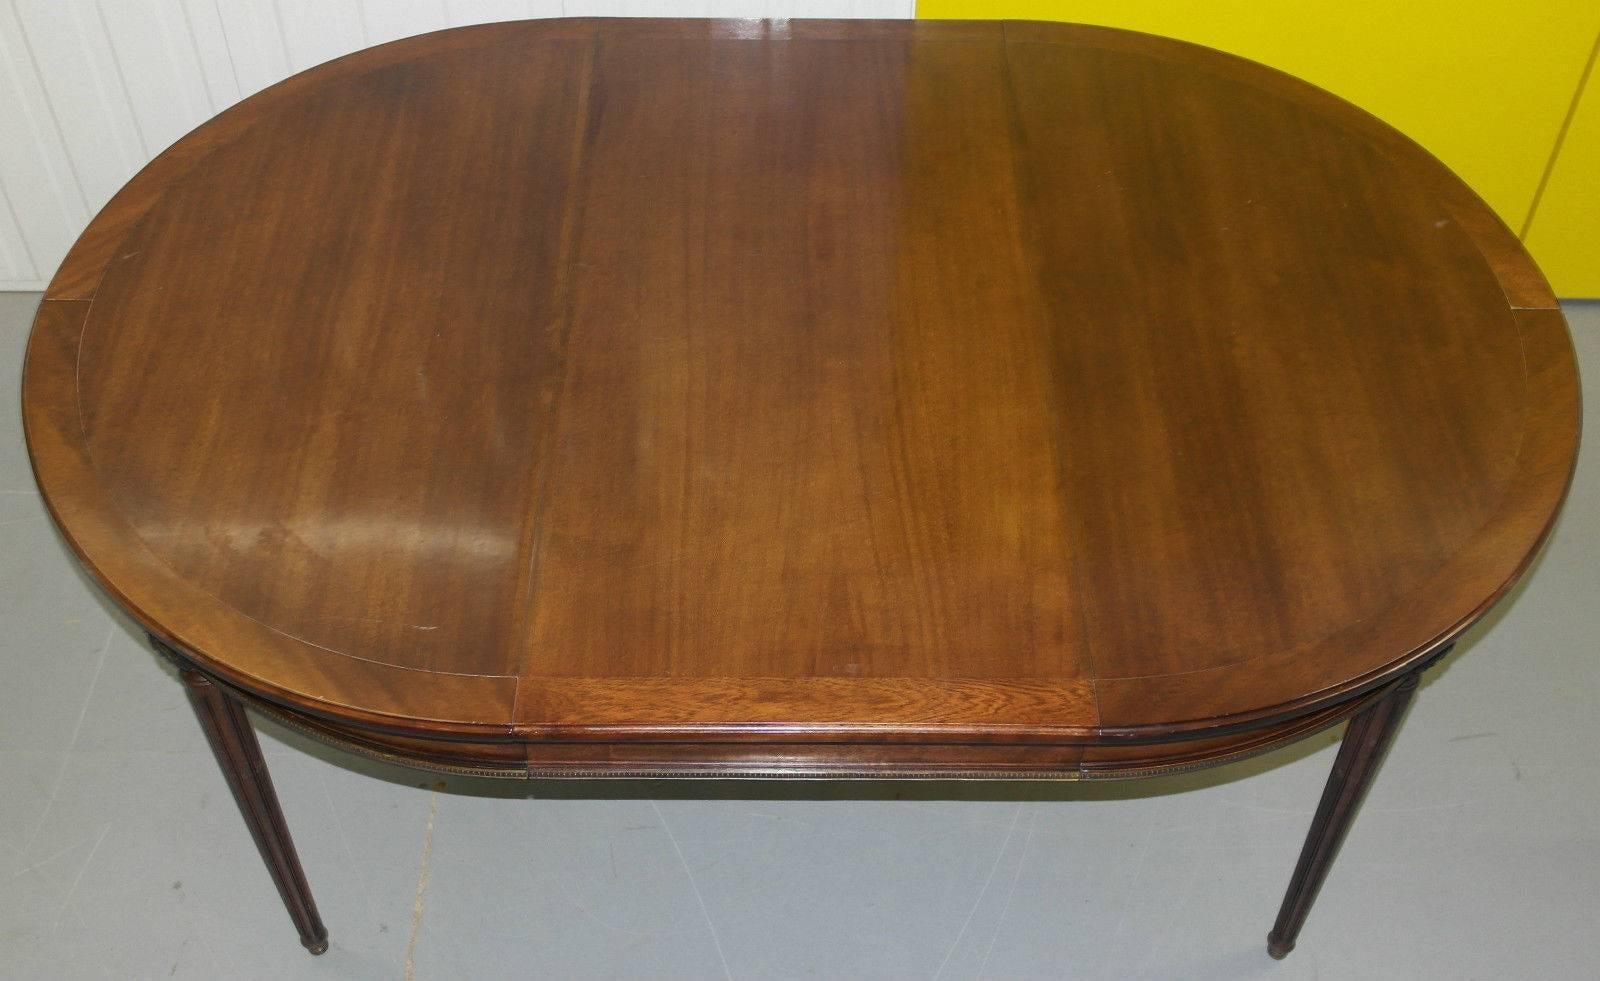 Regency Laval Mahogany and Brass Verlet France Extending Table Seats Four to Six